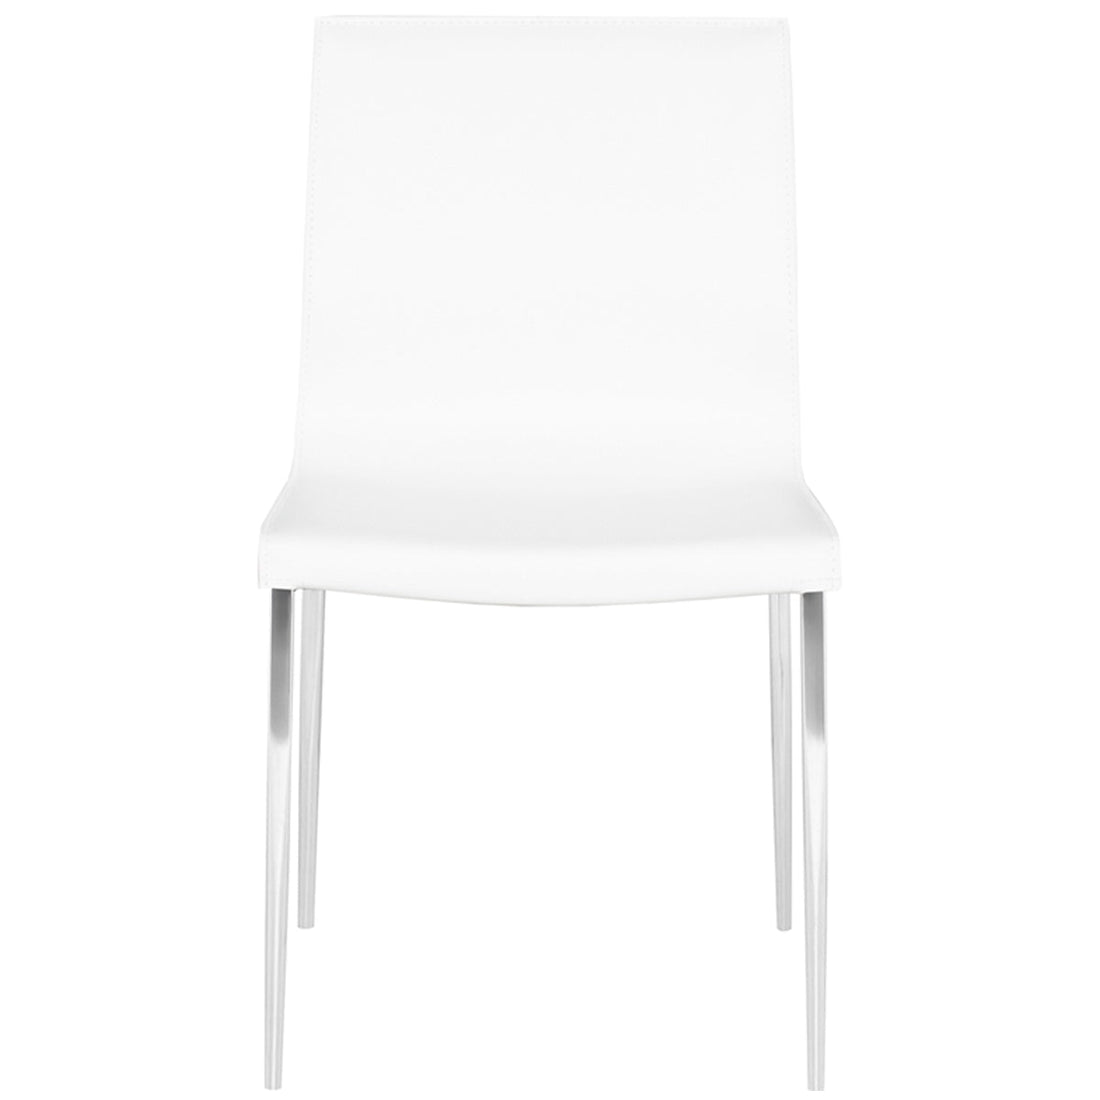 Nuevo Living Colter Dining Chair - Chrome Steel Legs